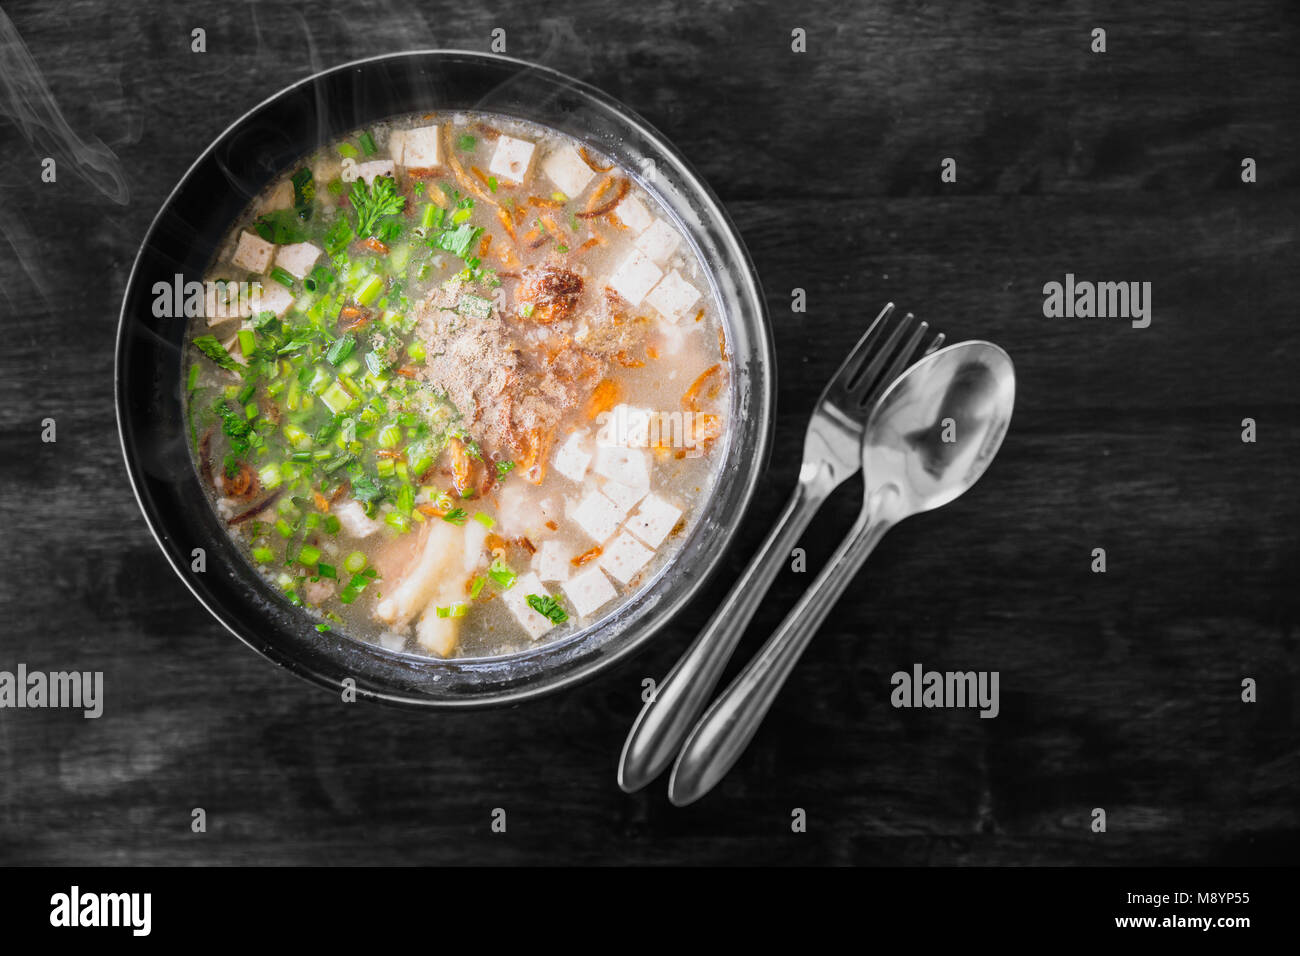 Vietnamese noodle soup pho with herbal vegetrable recipe served on wooden table Stock Photo